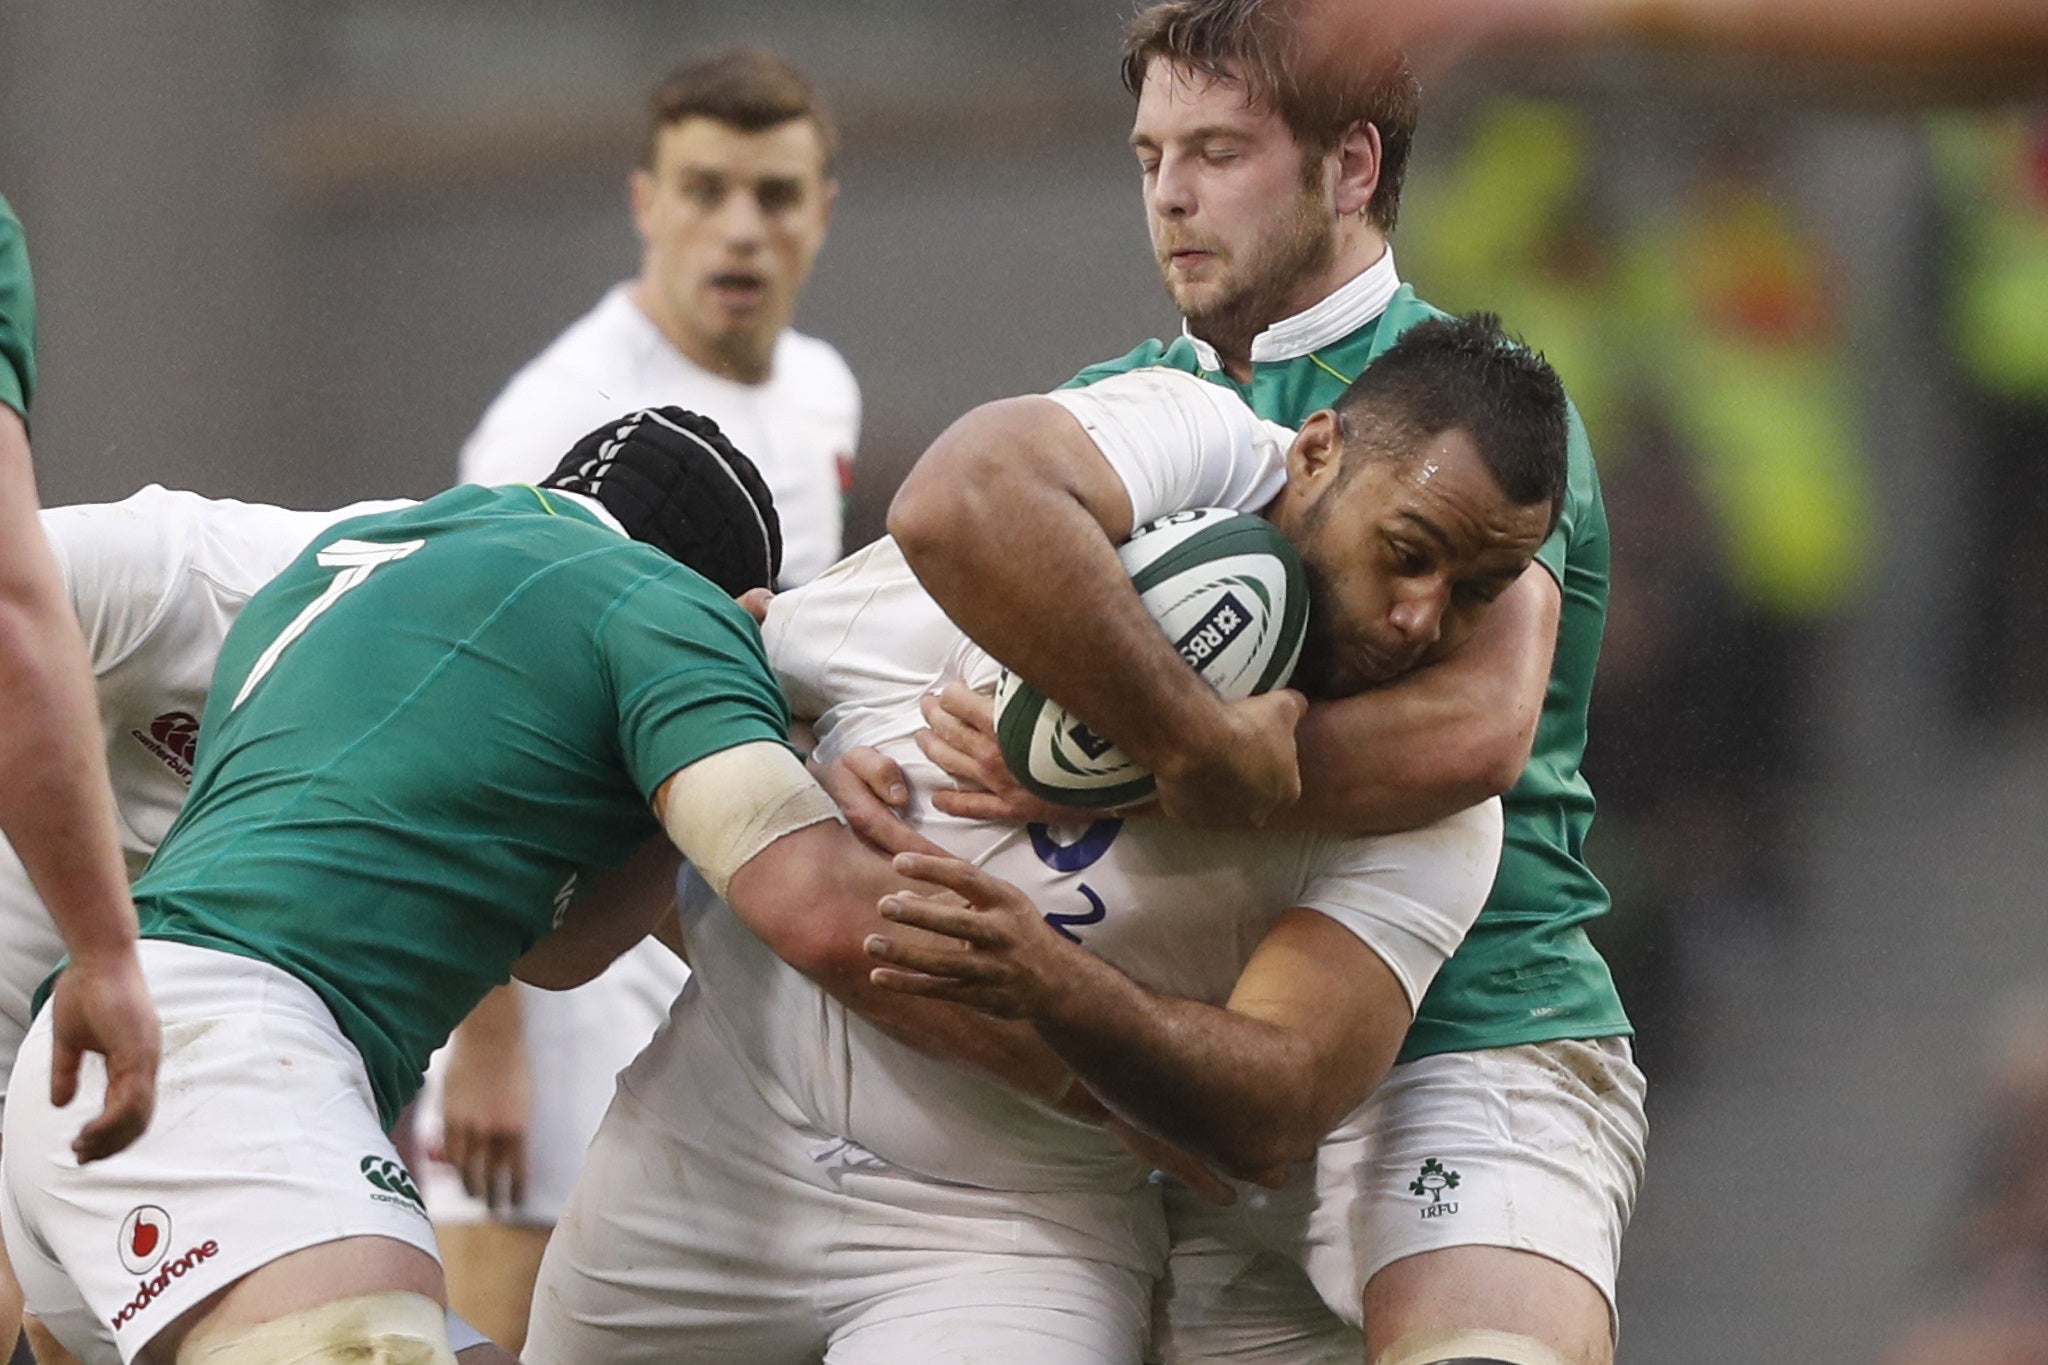 Billy Vunipola believes England were not able to adapt to the Irish choke tackle